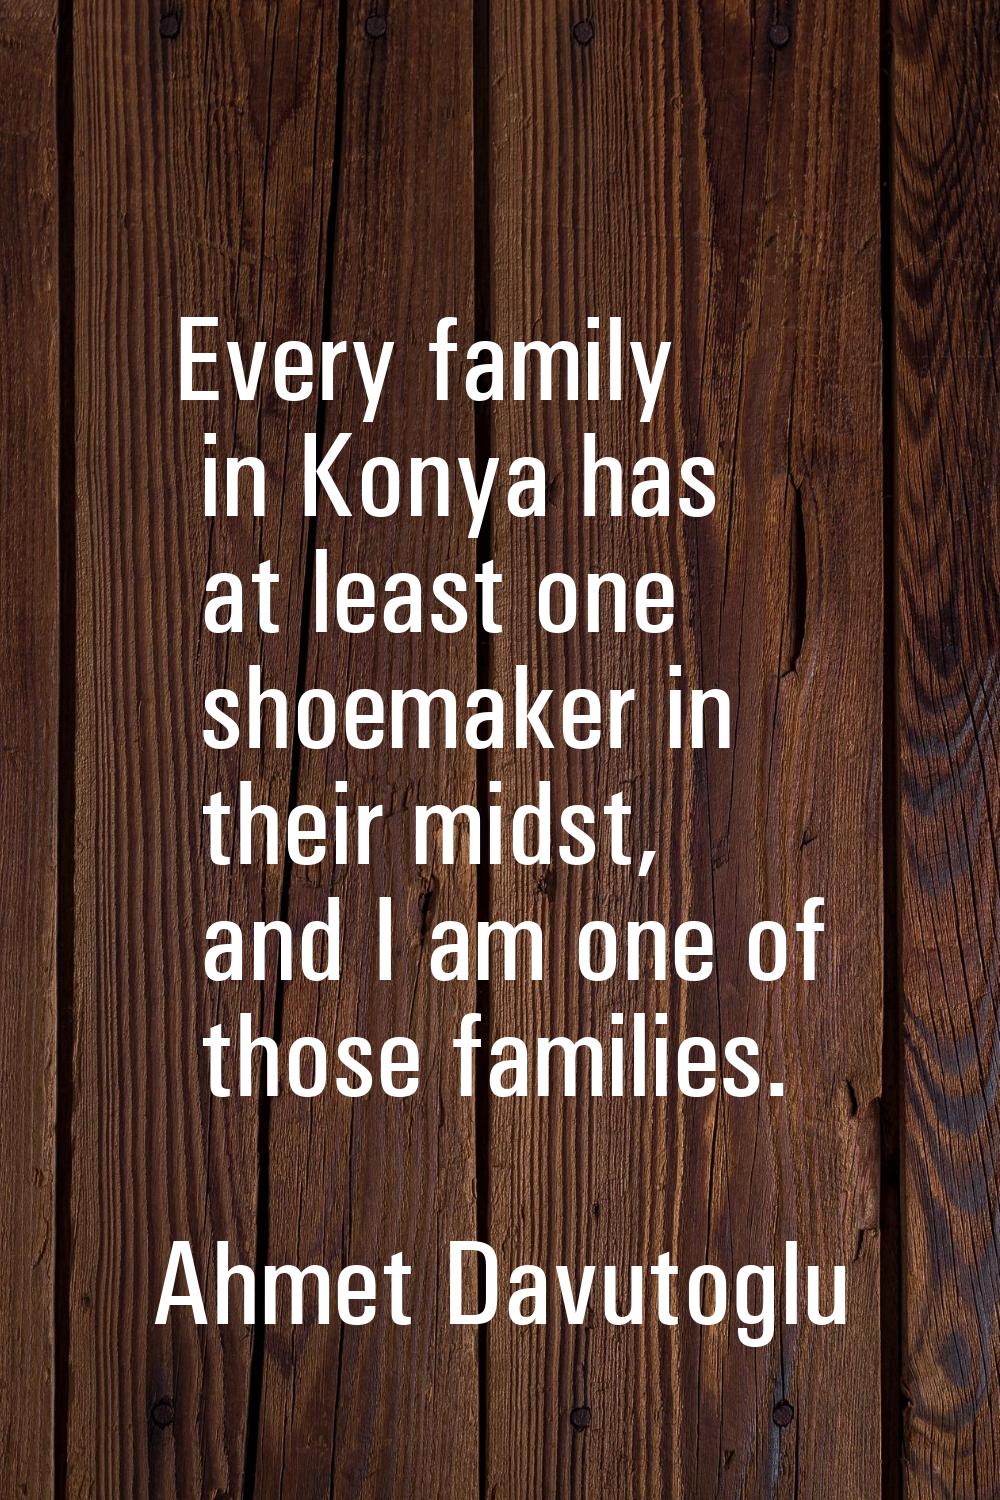 Every family in Konya has at least one shoemaker in their midst, and I am one of those families.